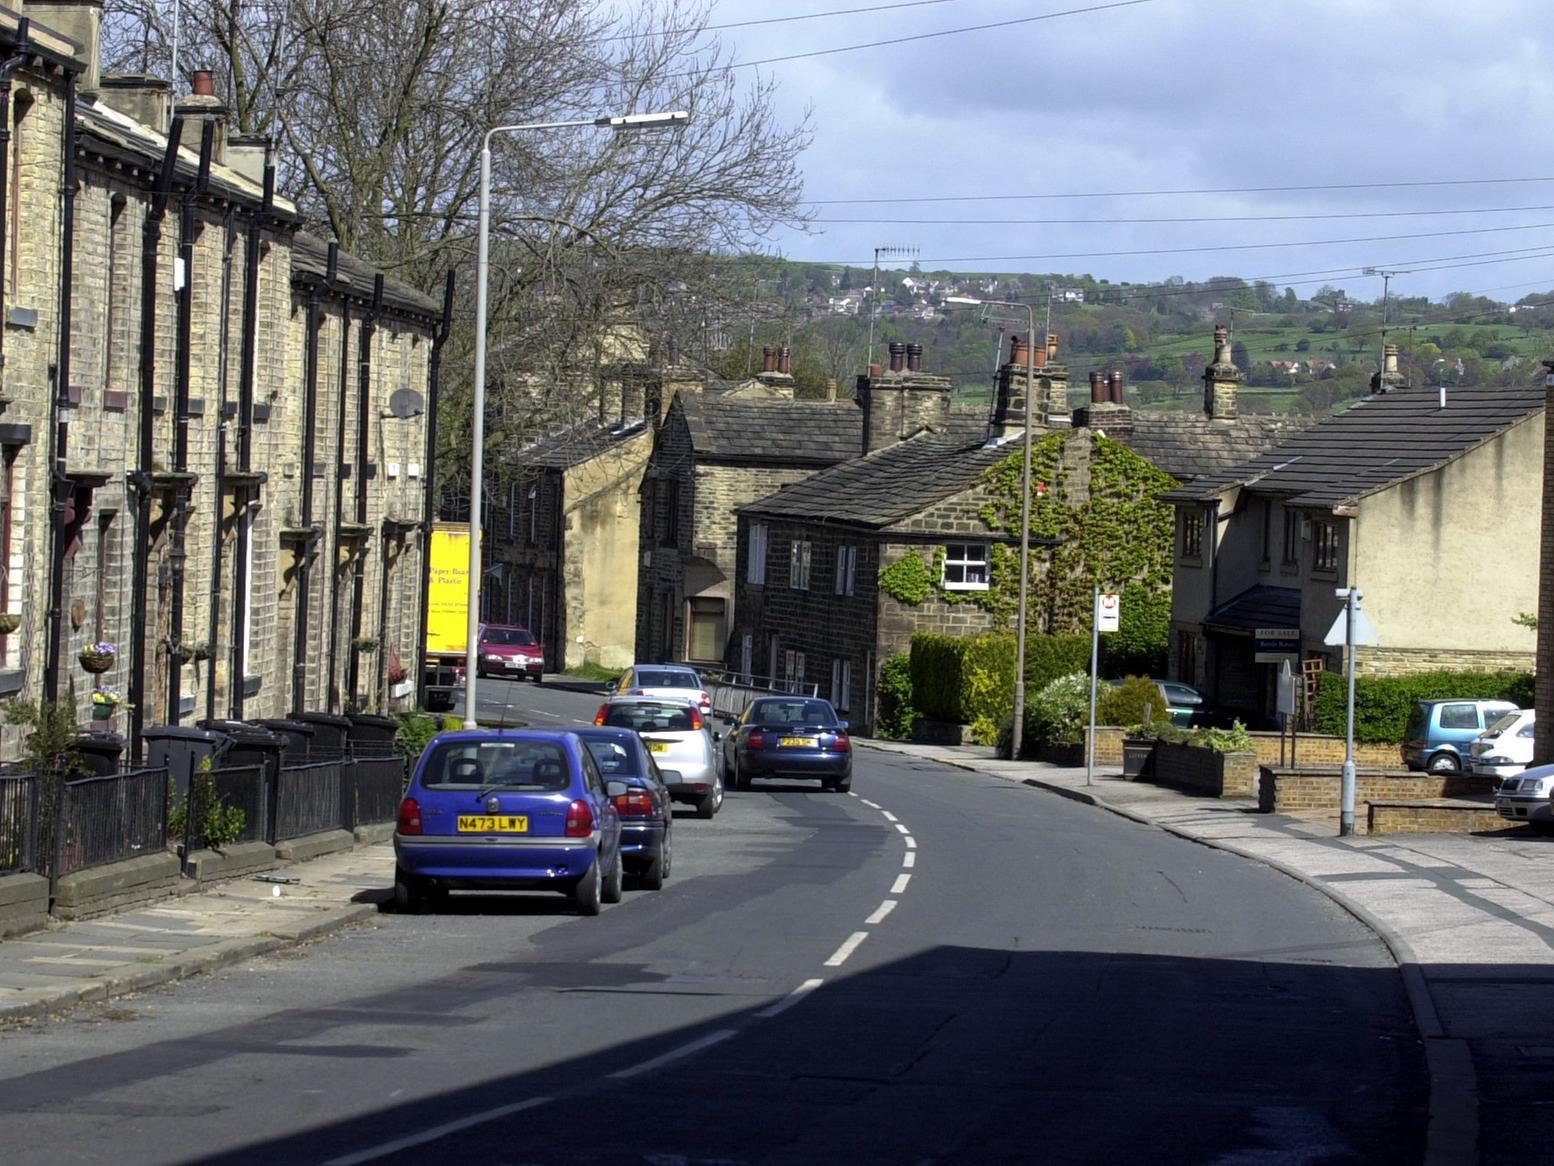 This road - Bagley Lane in Rodley - was named as one of the noisiest in the UK.